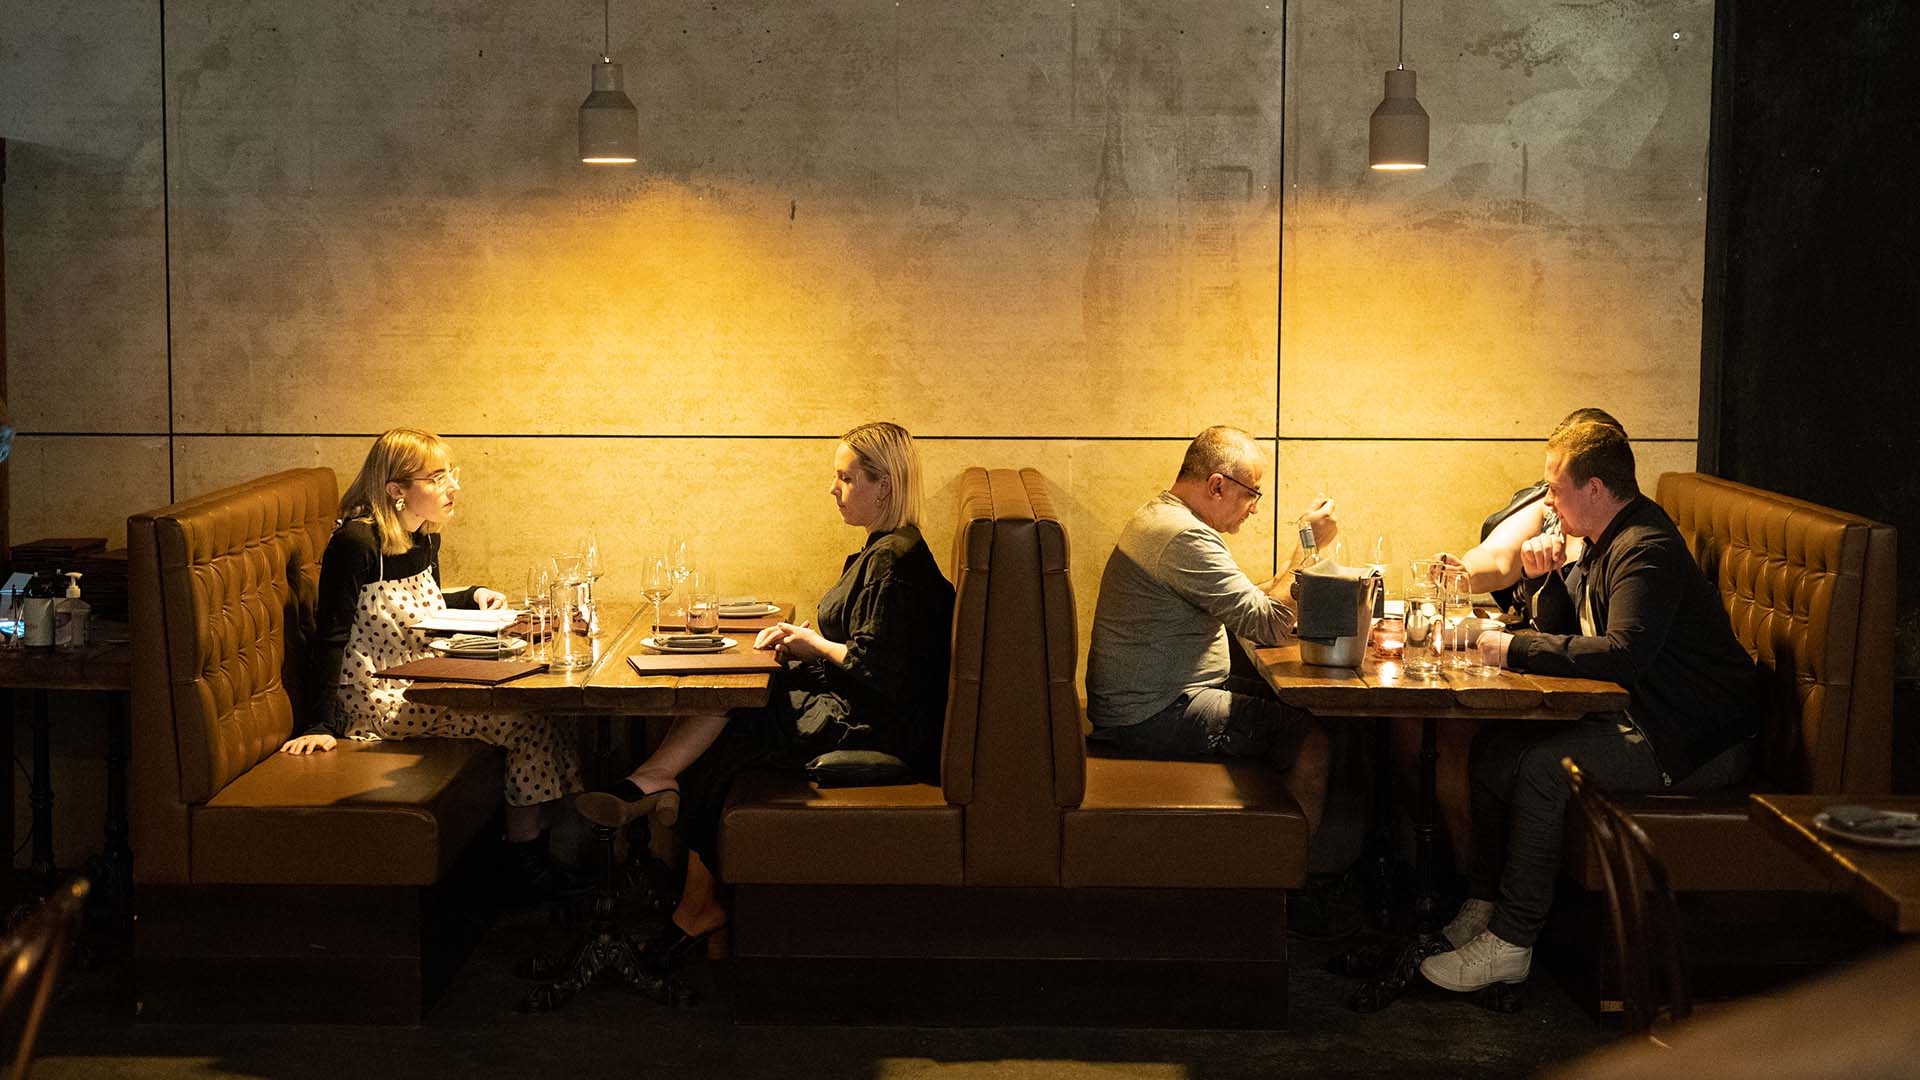 Eterna Is the New Late-Night Eatery Serving Up Roman-Style Meals and Cocktails in Fortitude Valley